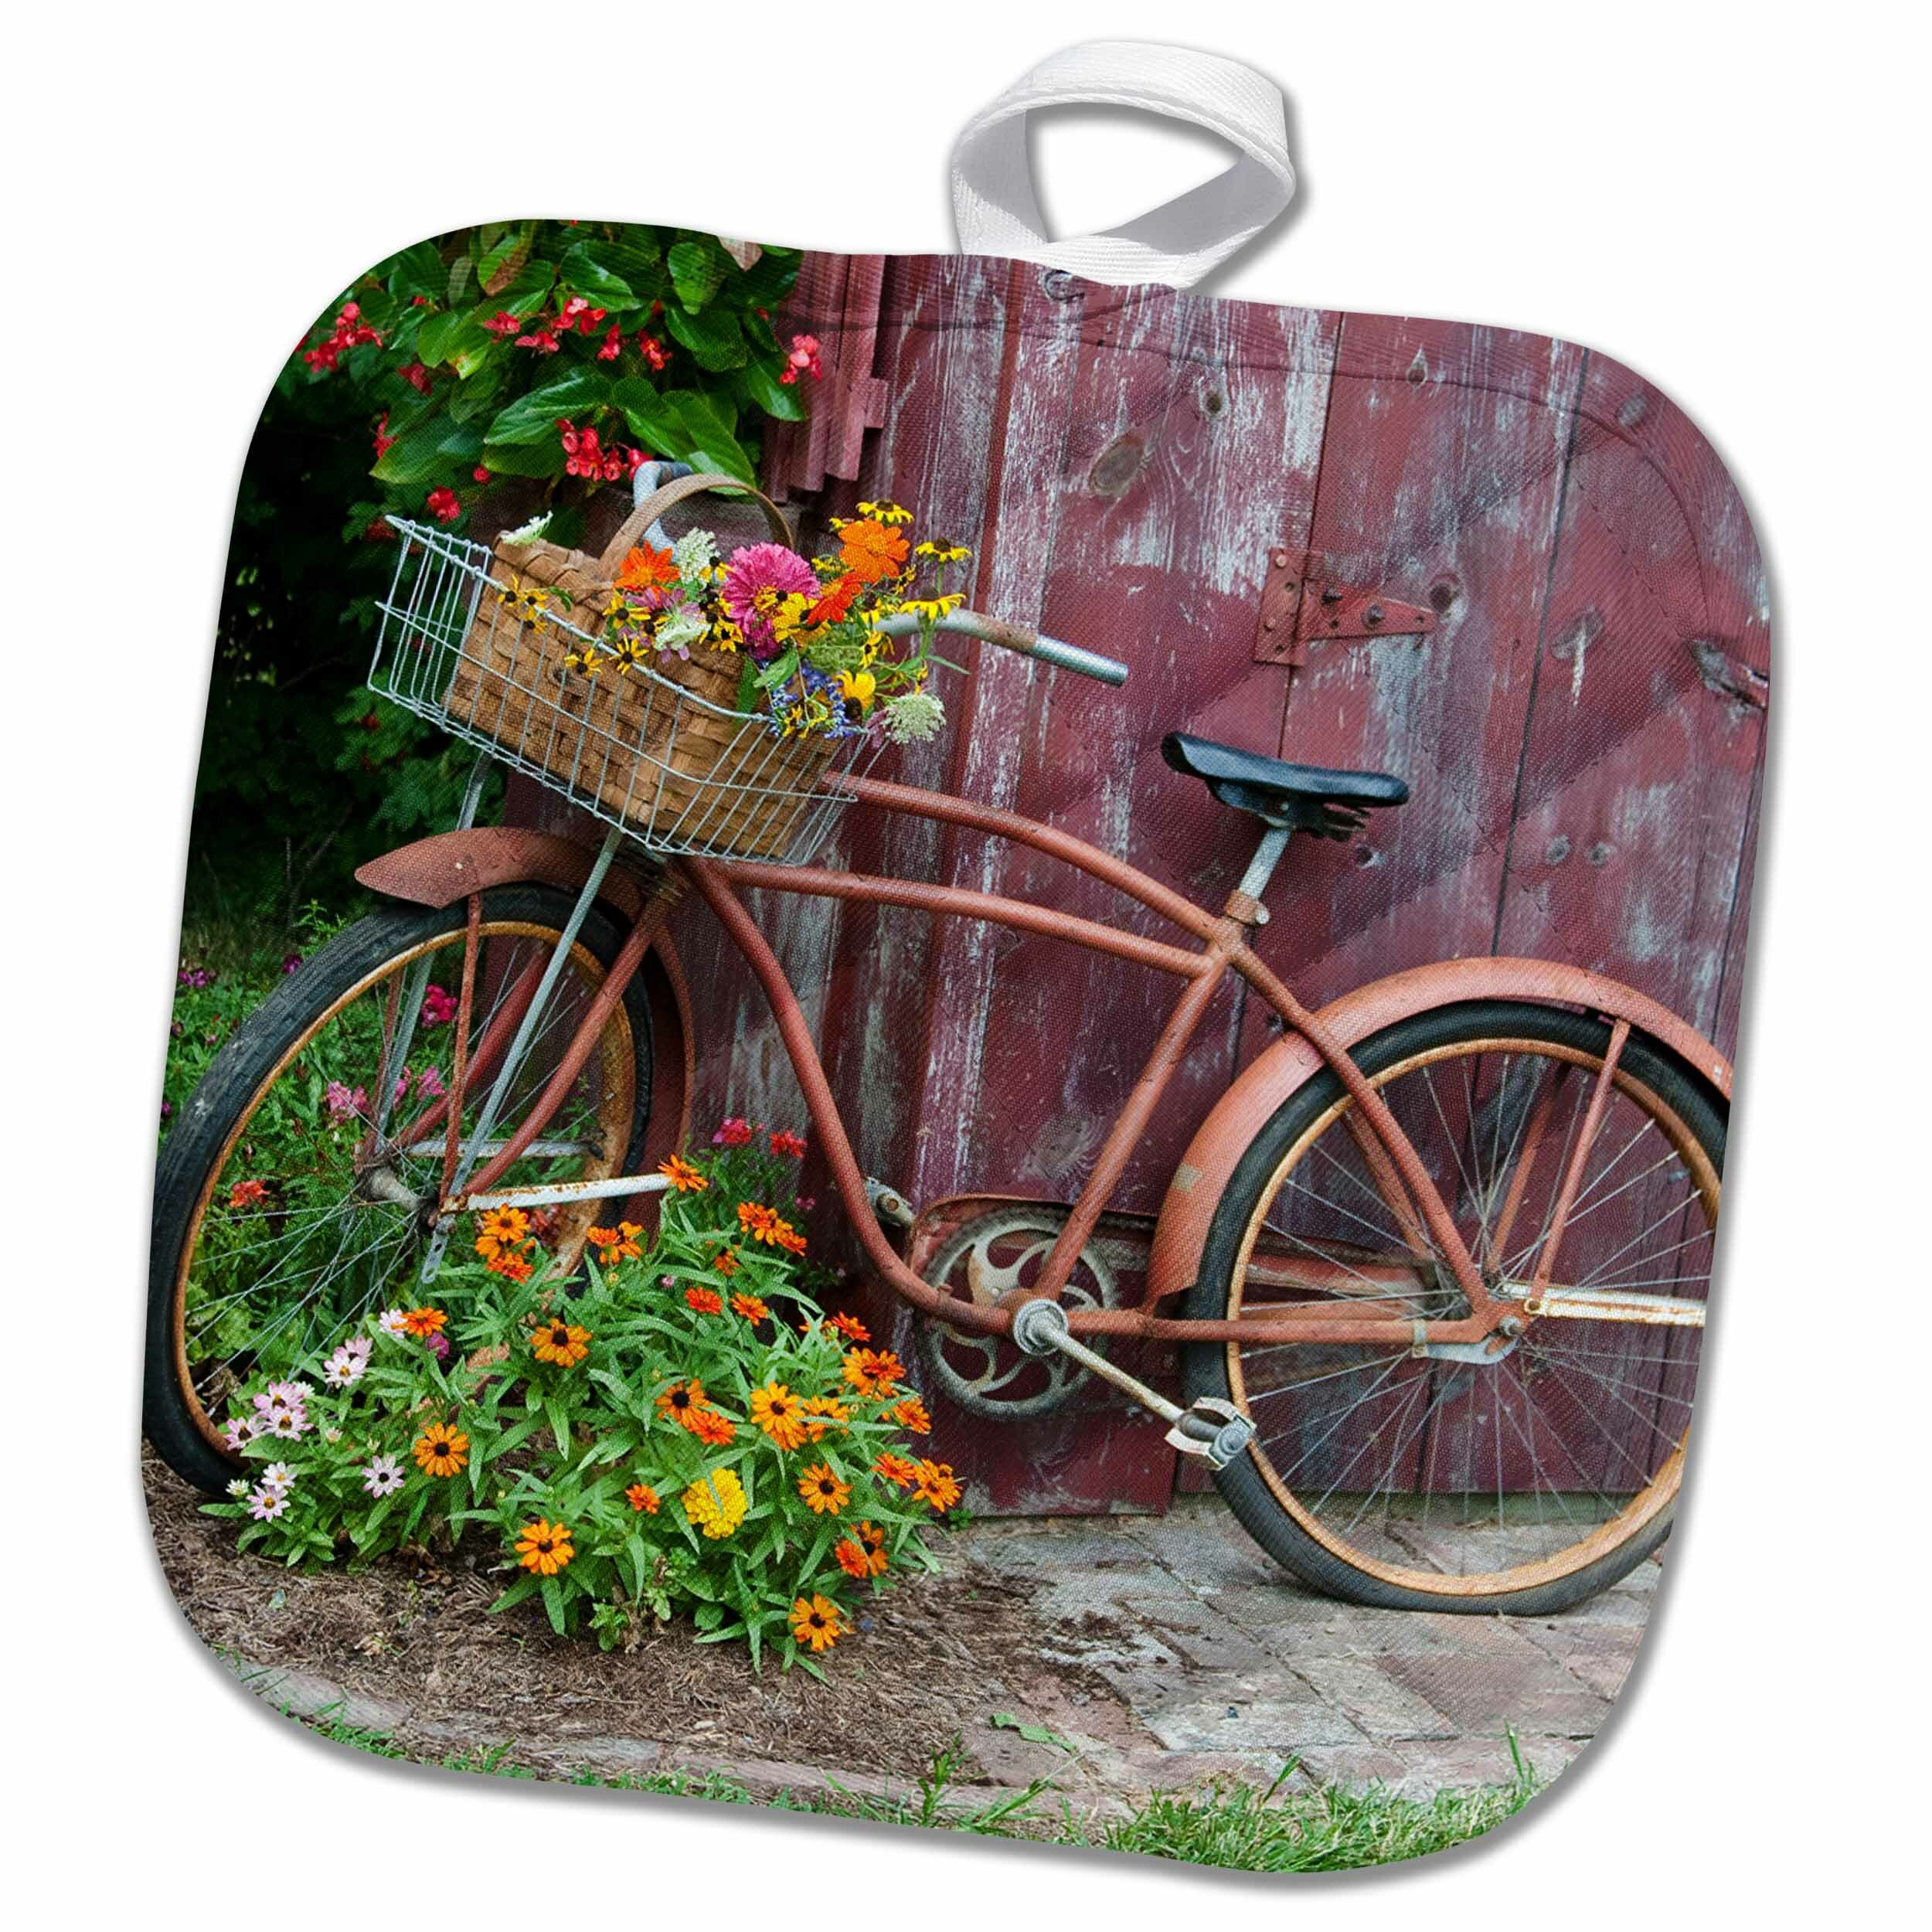 Download 3drose Old Bicycle With Flowers In Basket Next To Old Outhouse Garden Shed Potholder Wayfair